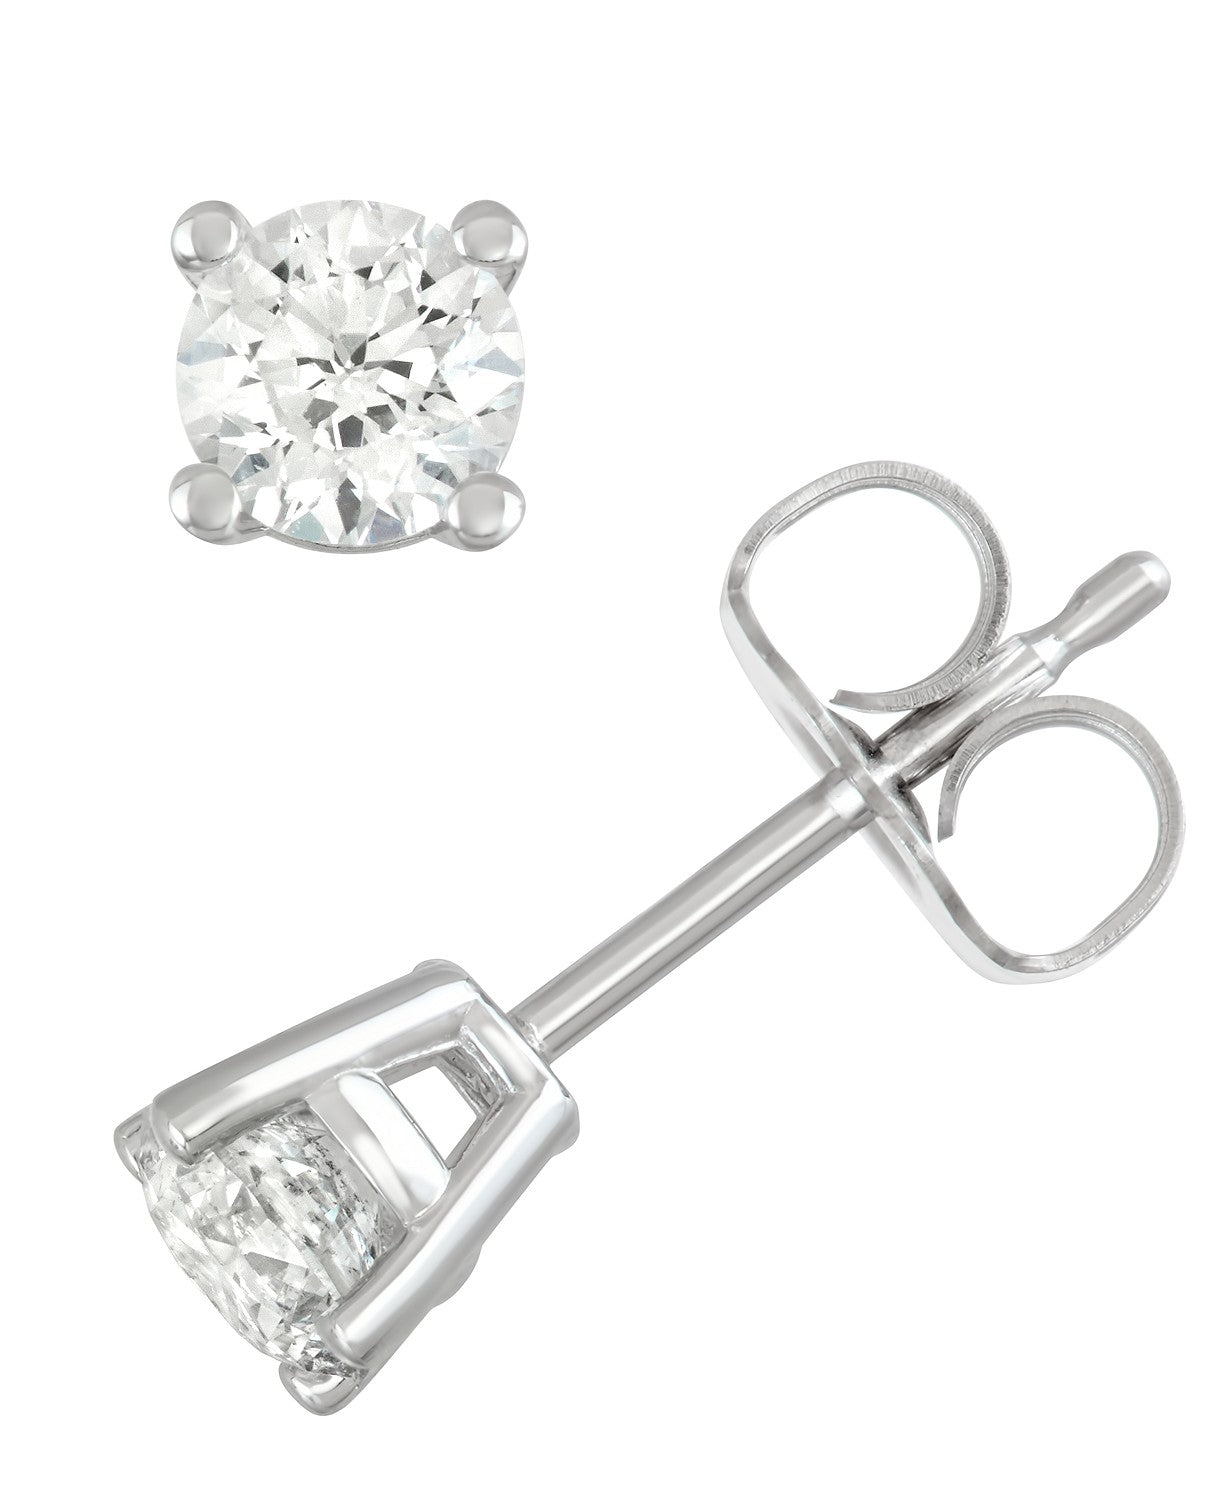 1/2 Carat TW Round Diamond Solitaire Stud Earrings in 14K White Gold (J/K Color - I2/I3 Clarity)